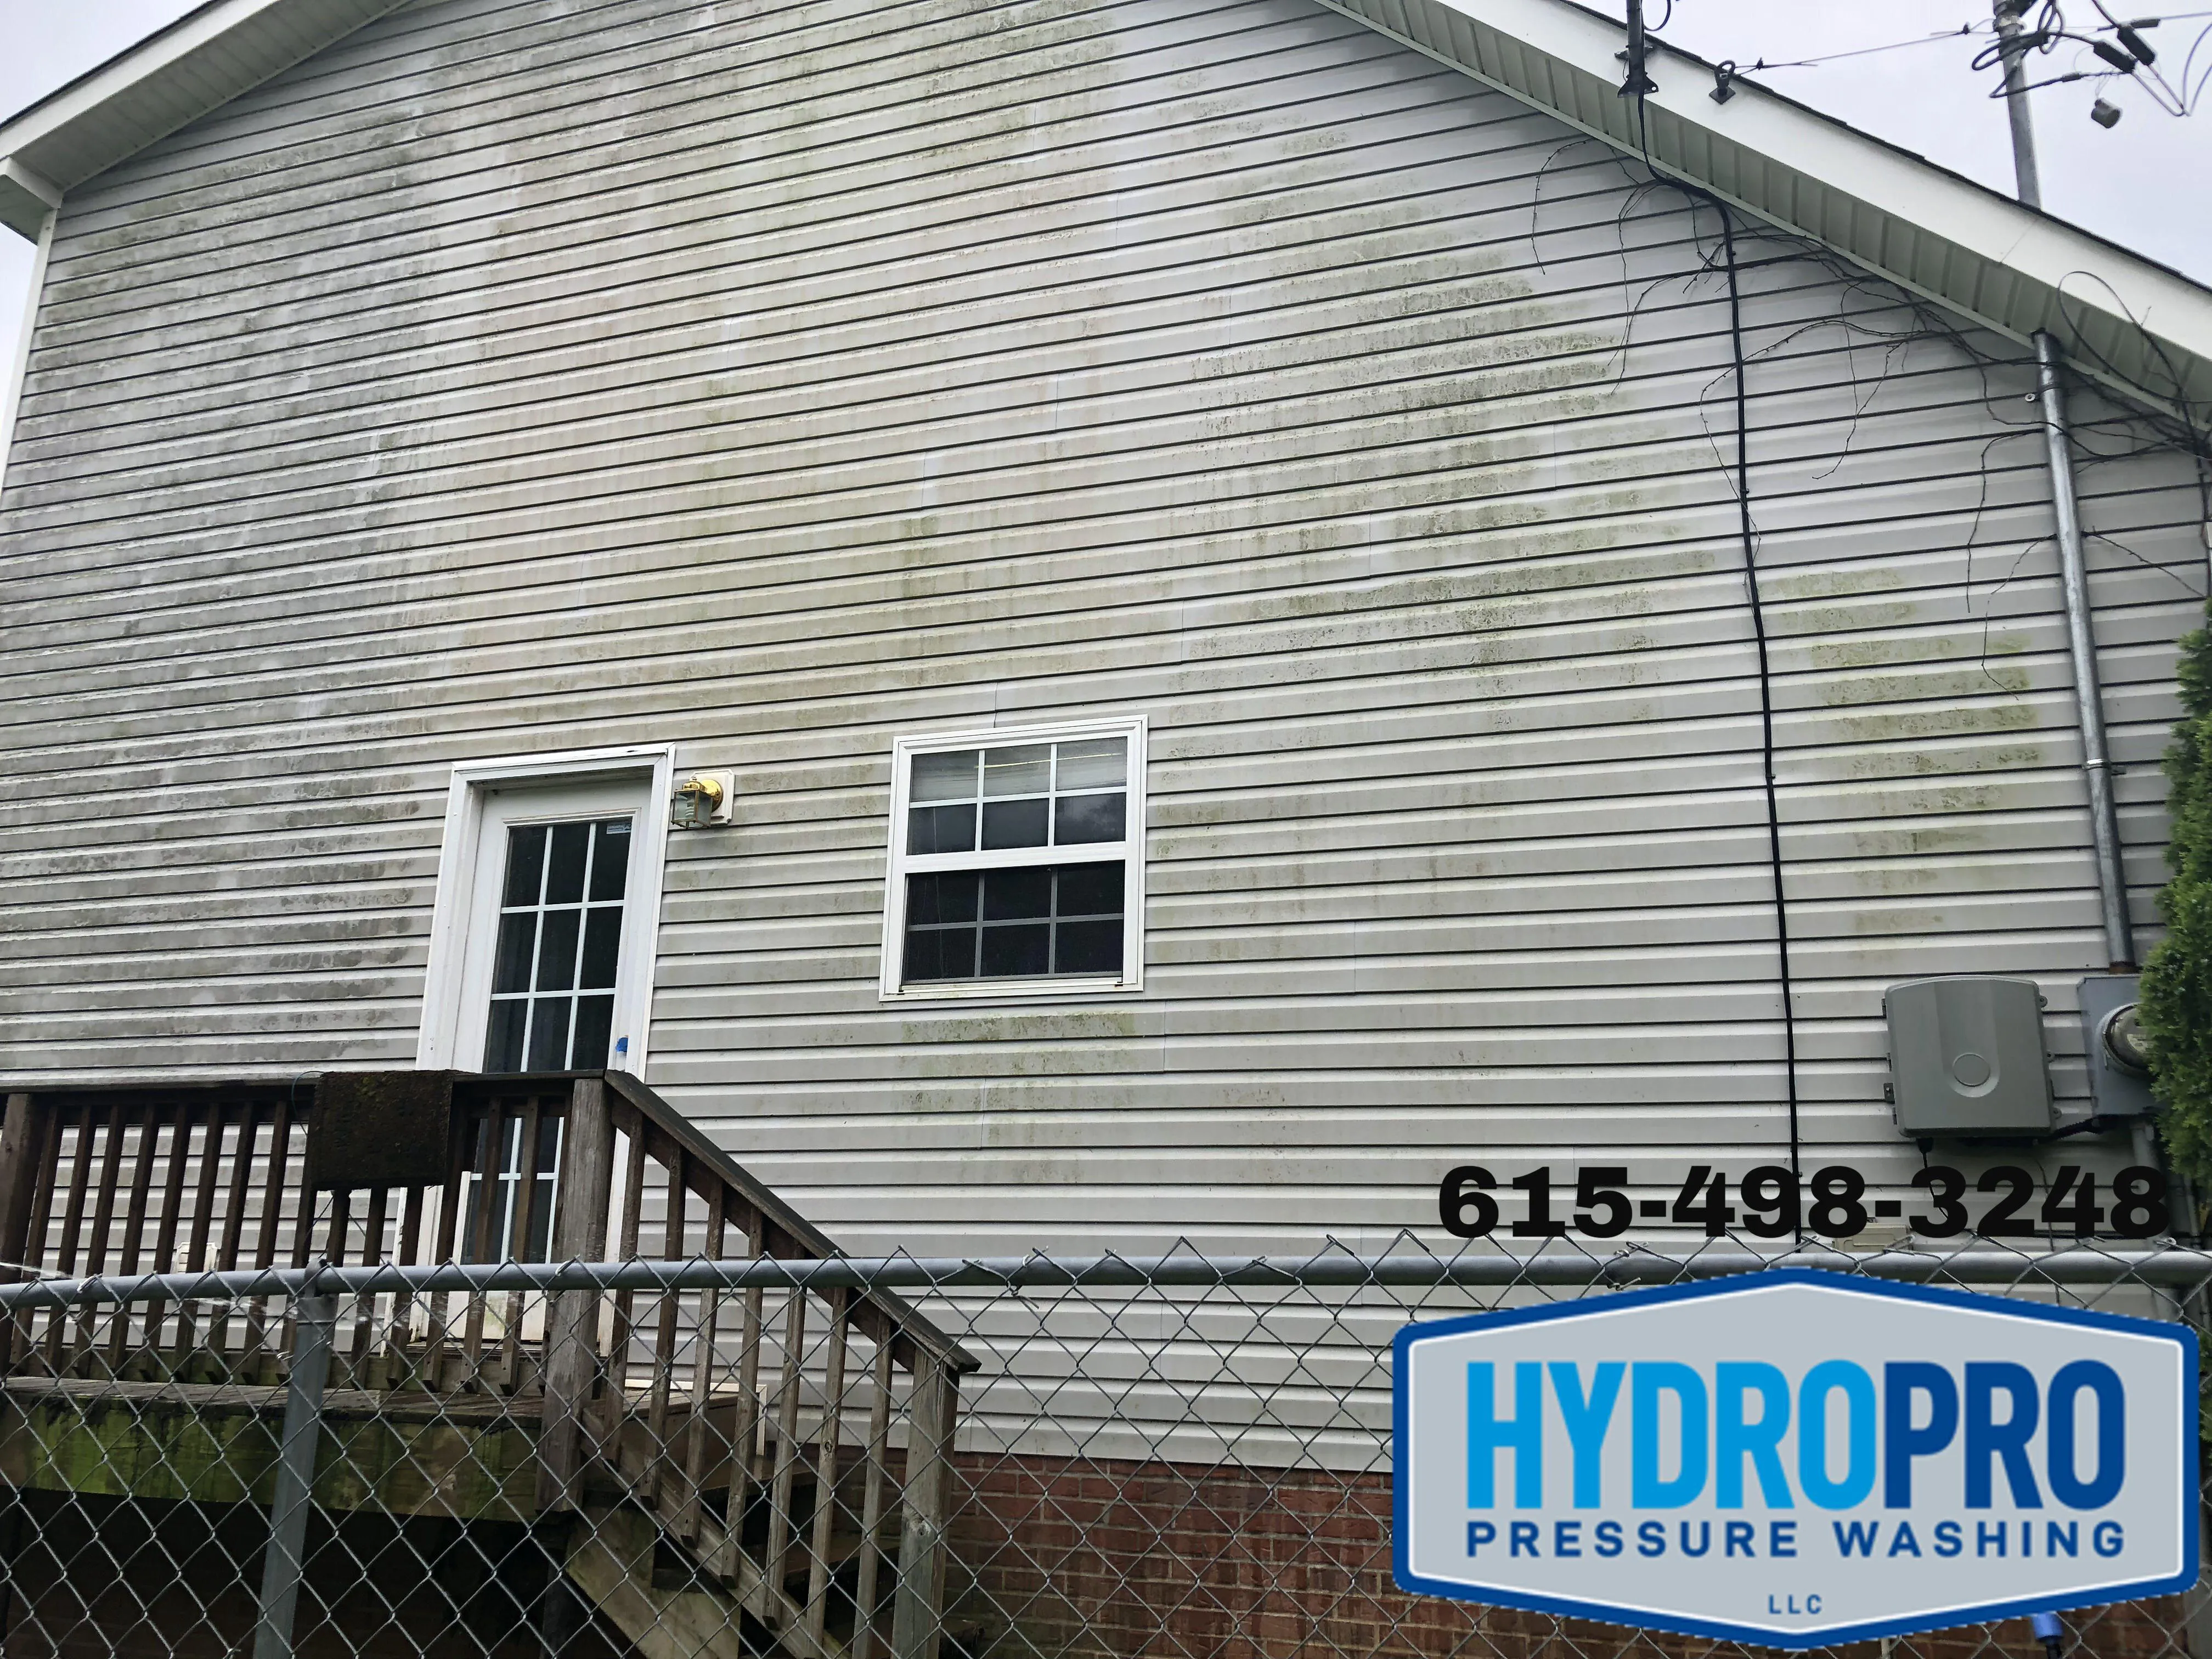 Residential for Oakland Power Washing in Clarksville, TN